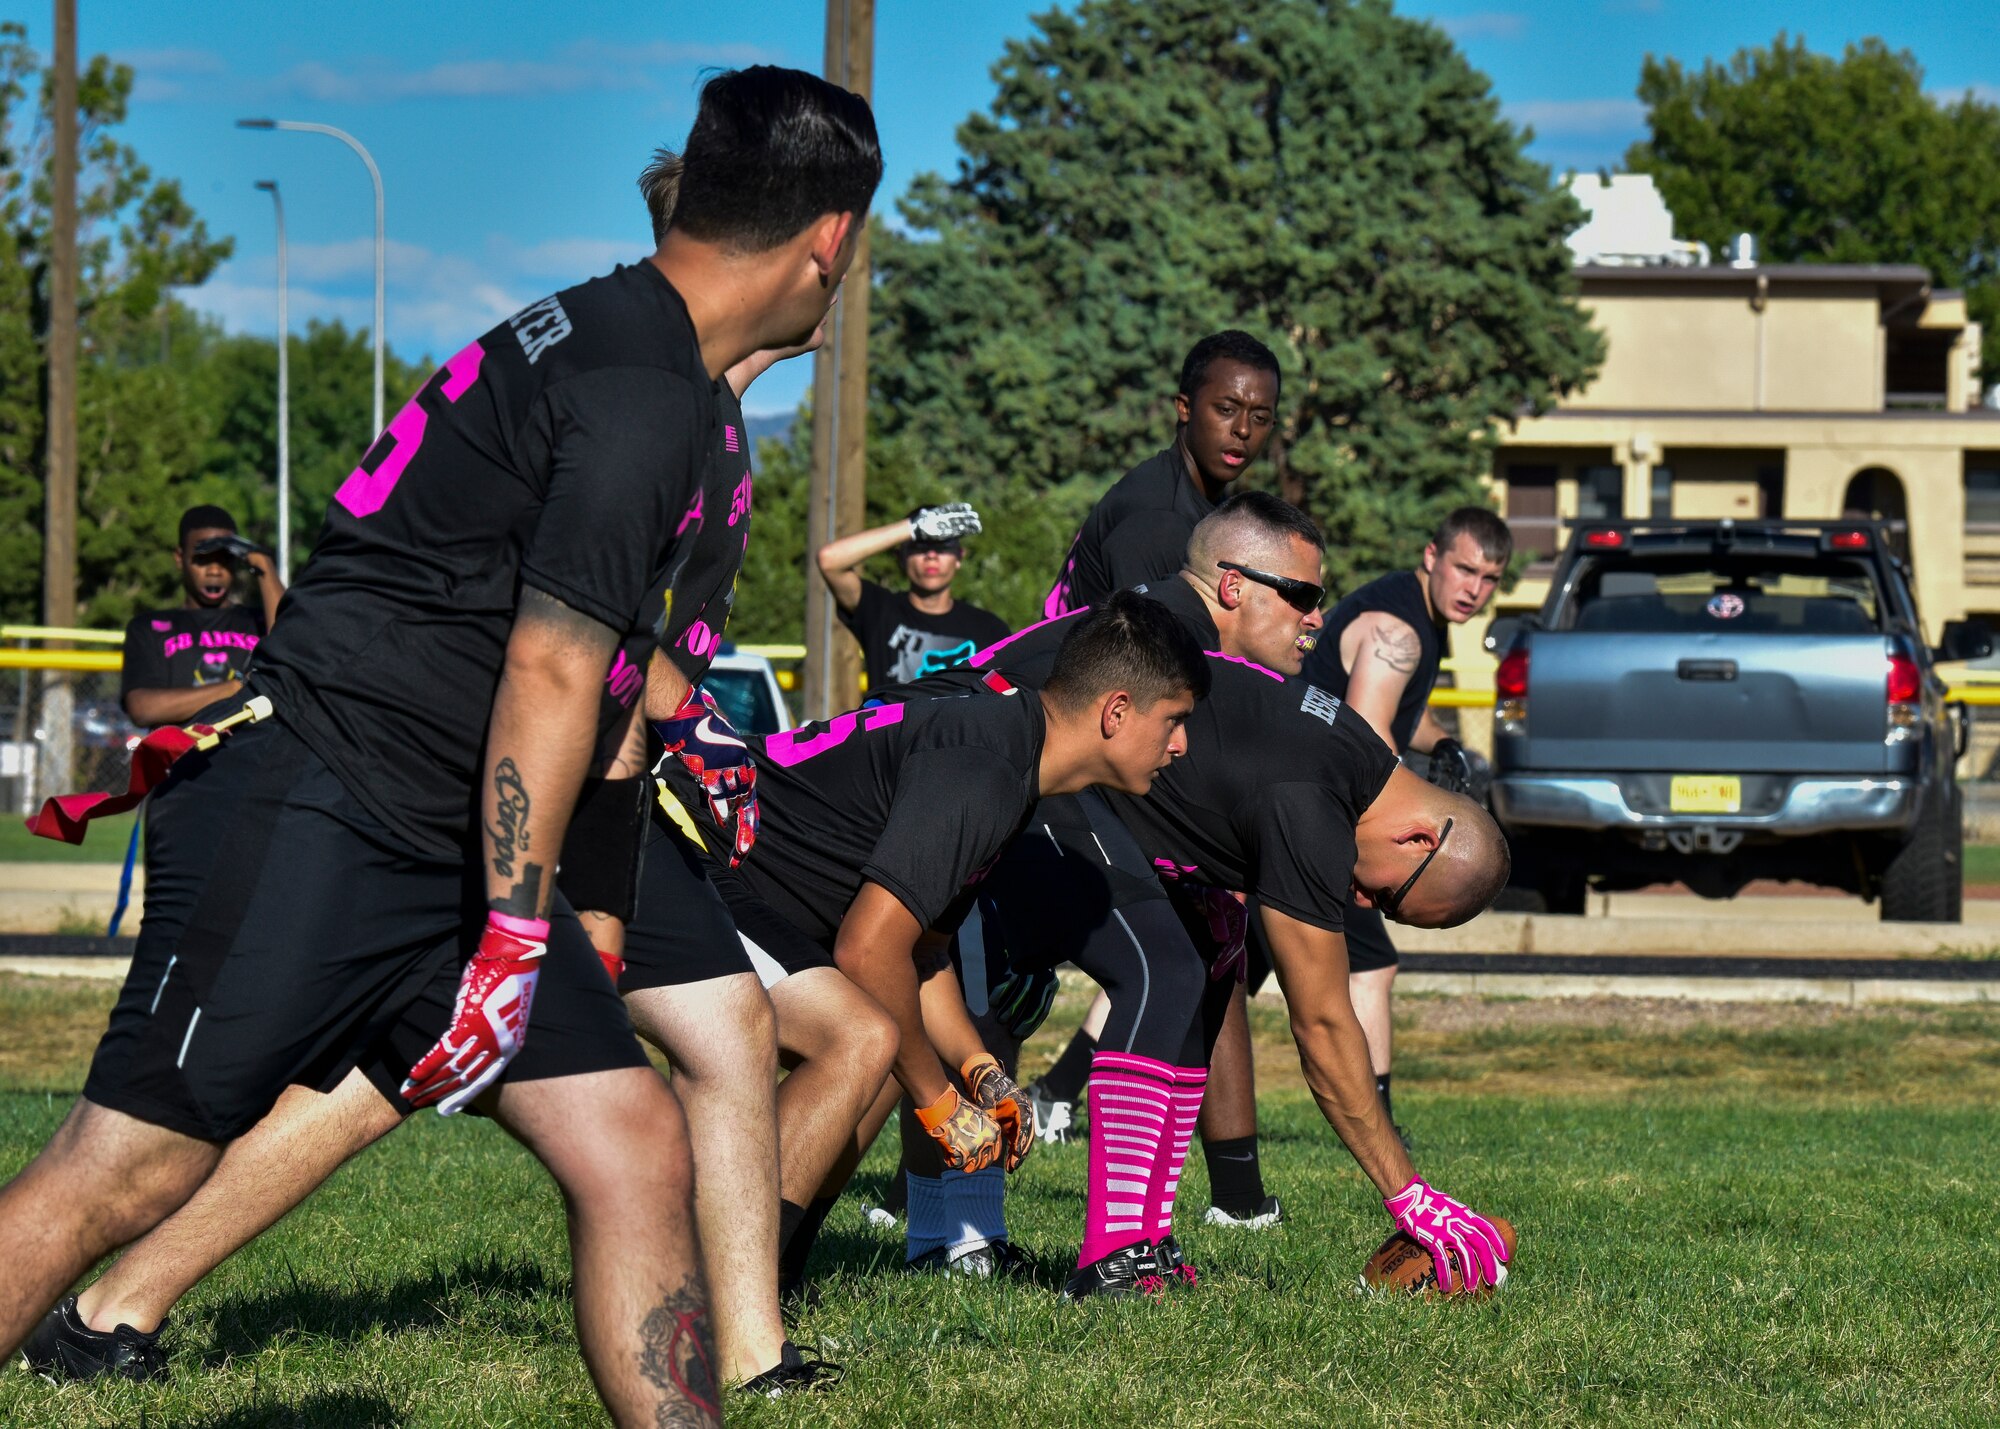 Members of the 58th AMXS flag football team line up prior to the snap at Kirtland Air Force Base, N.M., Sept. 17, 2018. There are eight teams participating in the 2018 KAFB Intramural Flag Football season this year. A playoff tournament is scheduled to be held after the regular season to determine an overall winner.  (U.S. Air Force photo by Airman Austin J. Prisbrey)